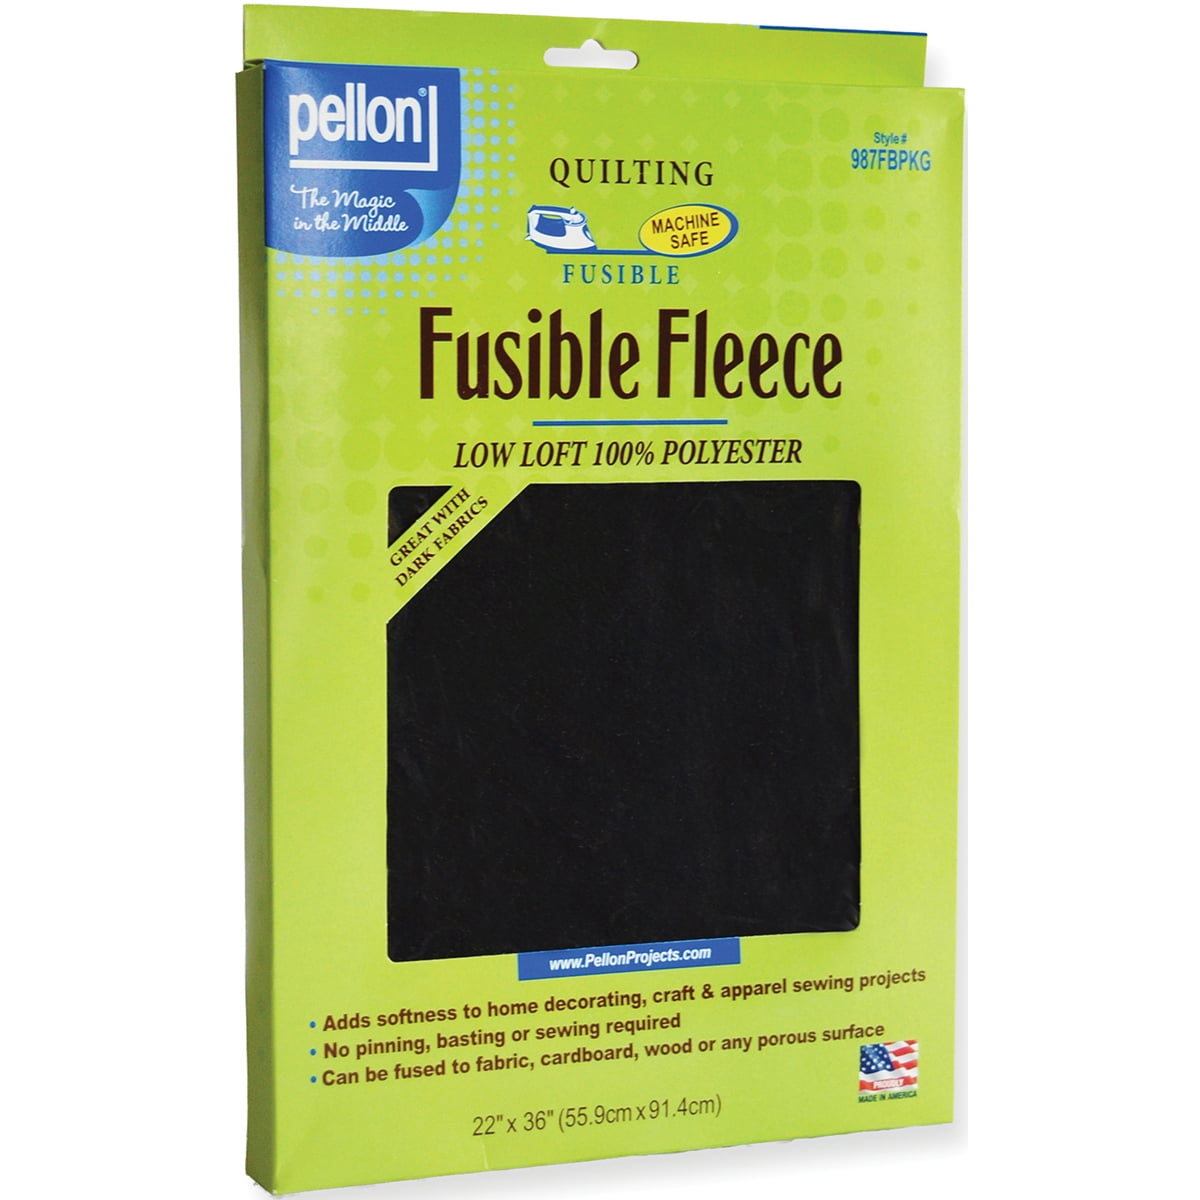 Fusible Fleece Stabilizer, Iron on Lightweight Fleece, Medium Weight Fusible  Fleece for Bags, Clothes, Quilts, Table Runners, Coasters Etc 